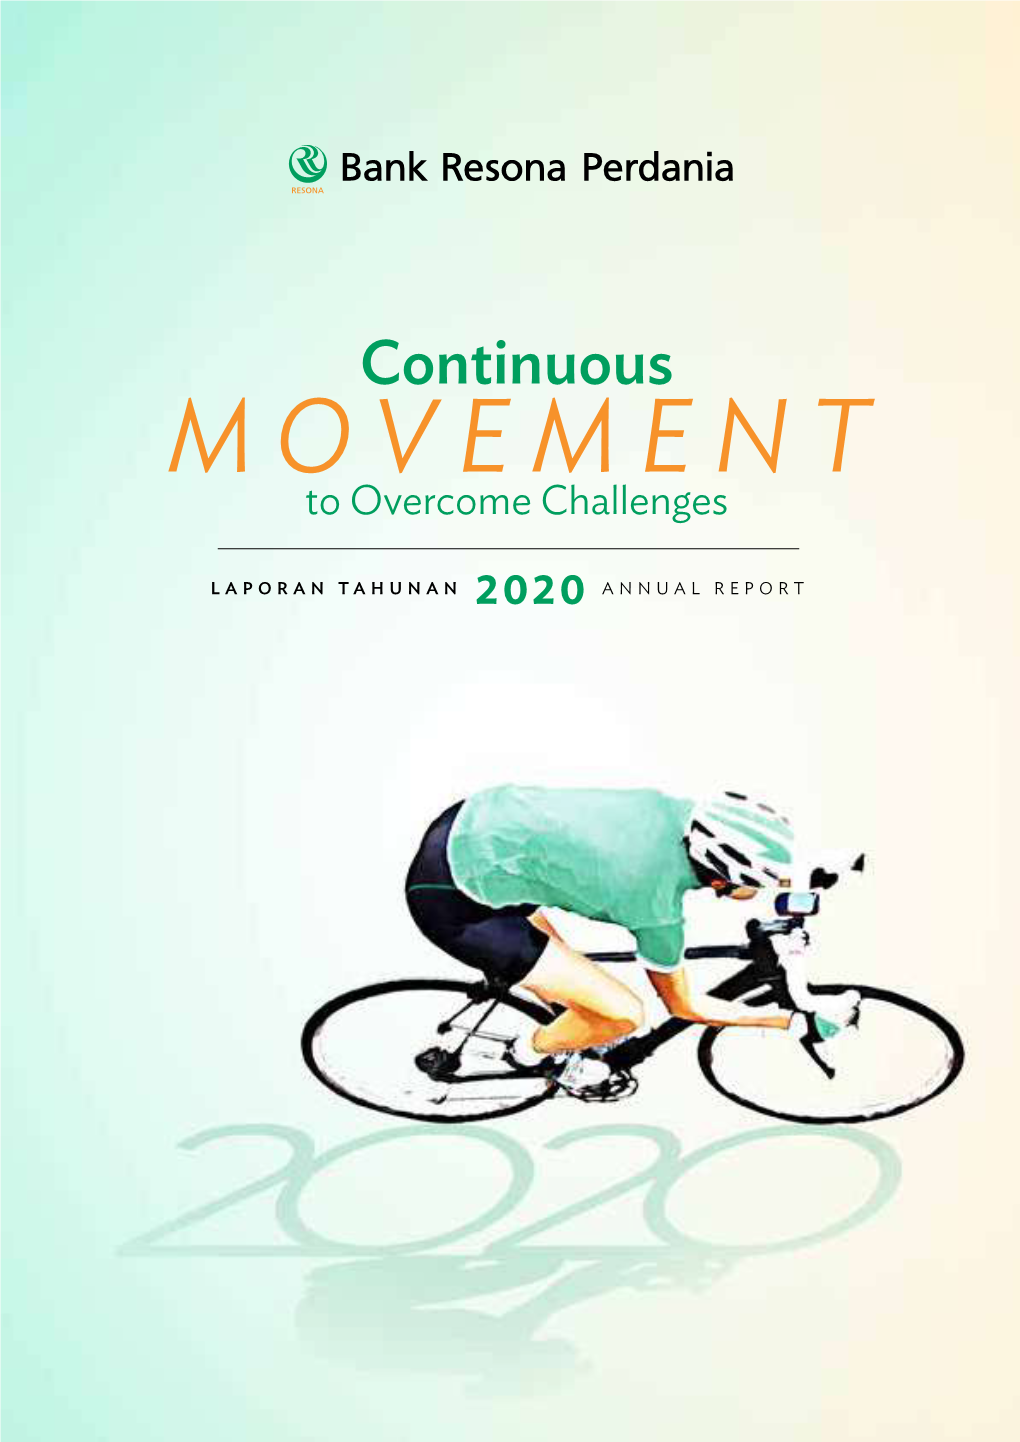 MOVEMENT to Overcome Challenges